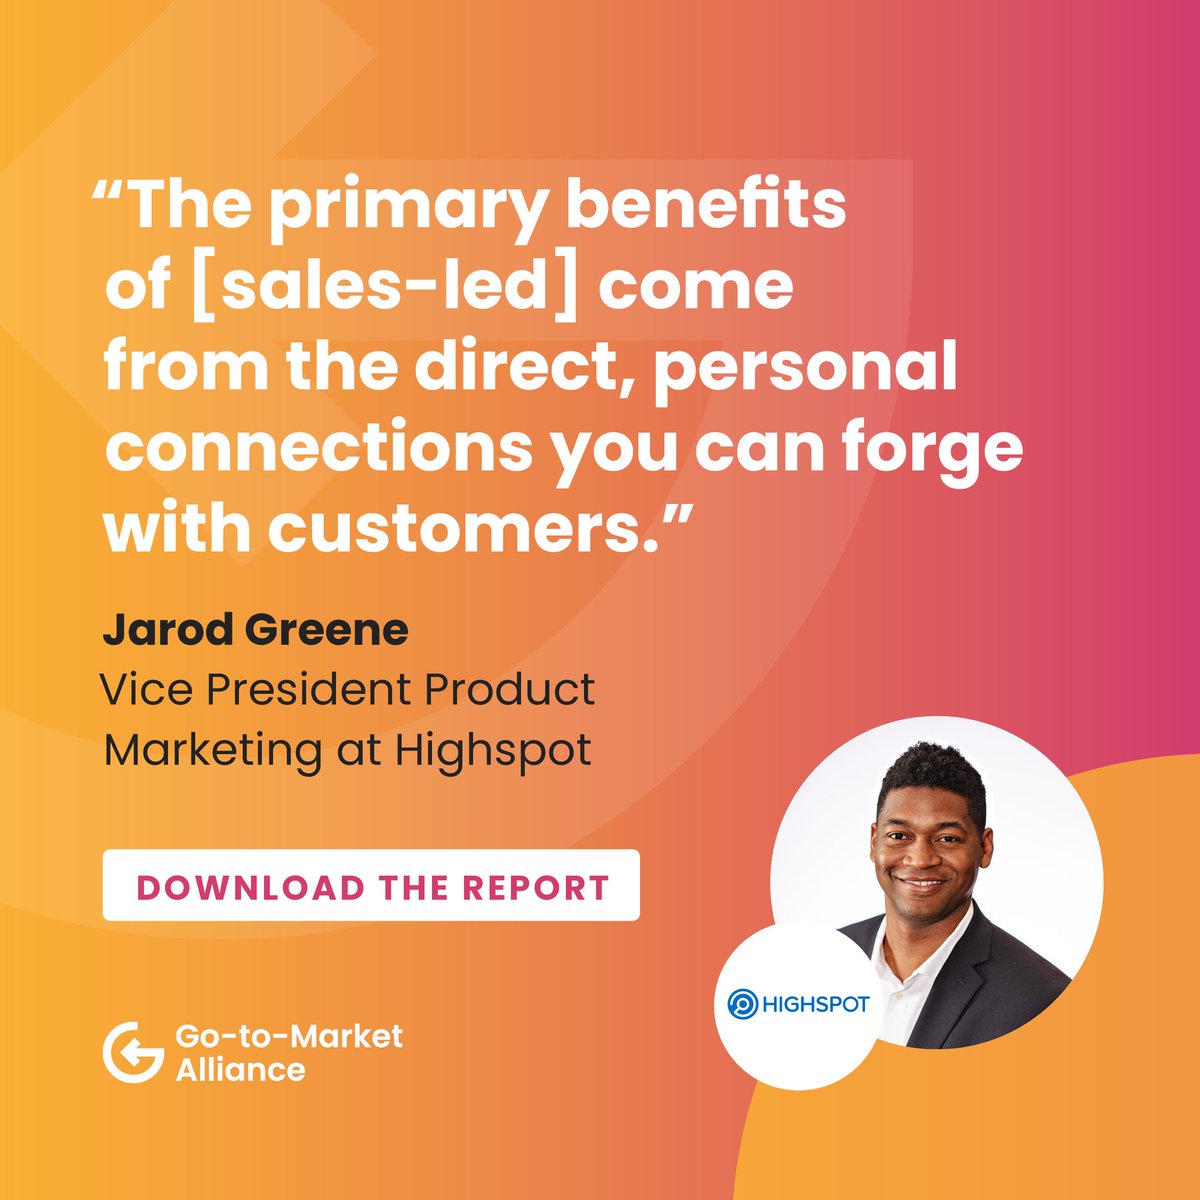 Jarod Greene, VP of Product and Customer Marketing at Highspot, is a sales-led guru. With his expertise, you’ll learn what a sales-led GTM strategy is in practice, and how to implement your own.

#gotomarket #salesled

gotomarketalliance.com/sales-led-go-t…